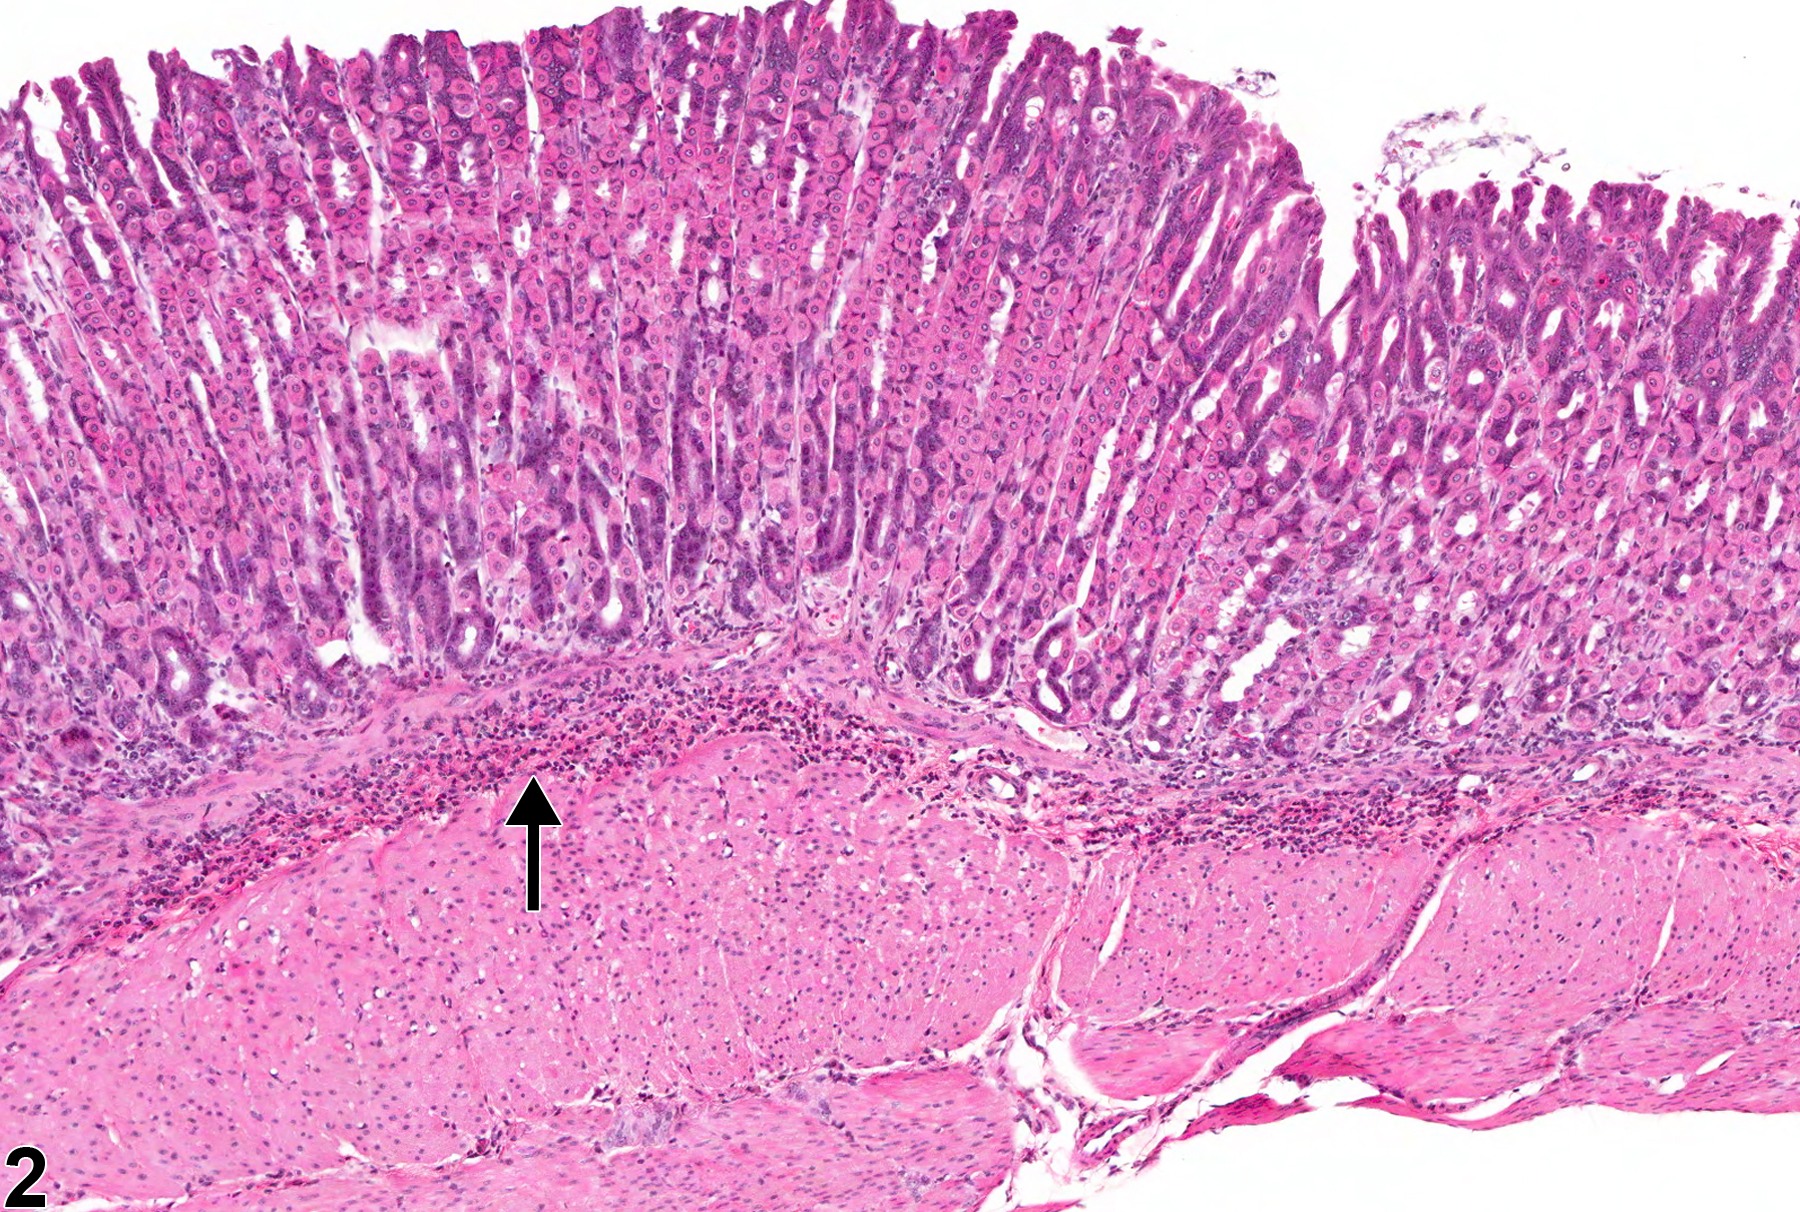 Image of infiltration cellular  in the glandular stomach from a female B6C3F1 mouse in a subchronic study